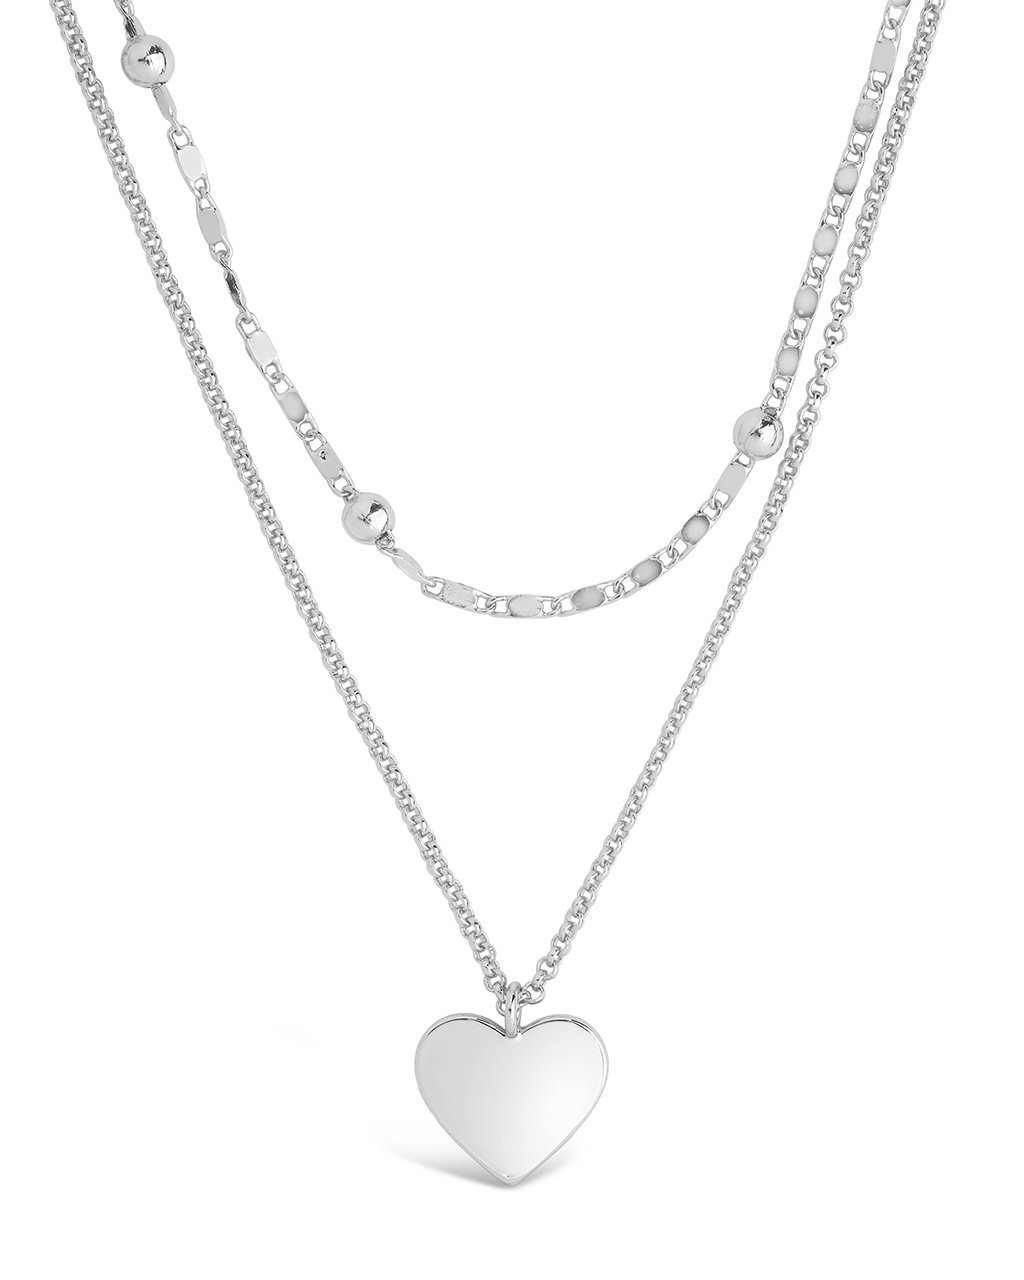 Beaded Chain & Heart Charm Layered Necklace Necklace Sterling Forever Silver 